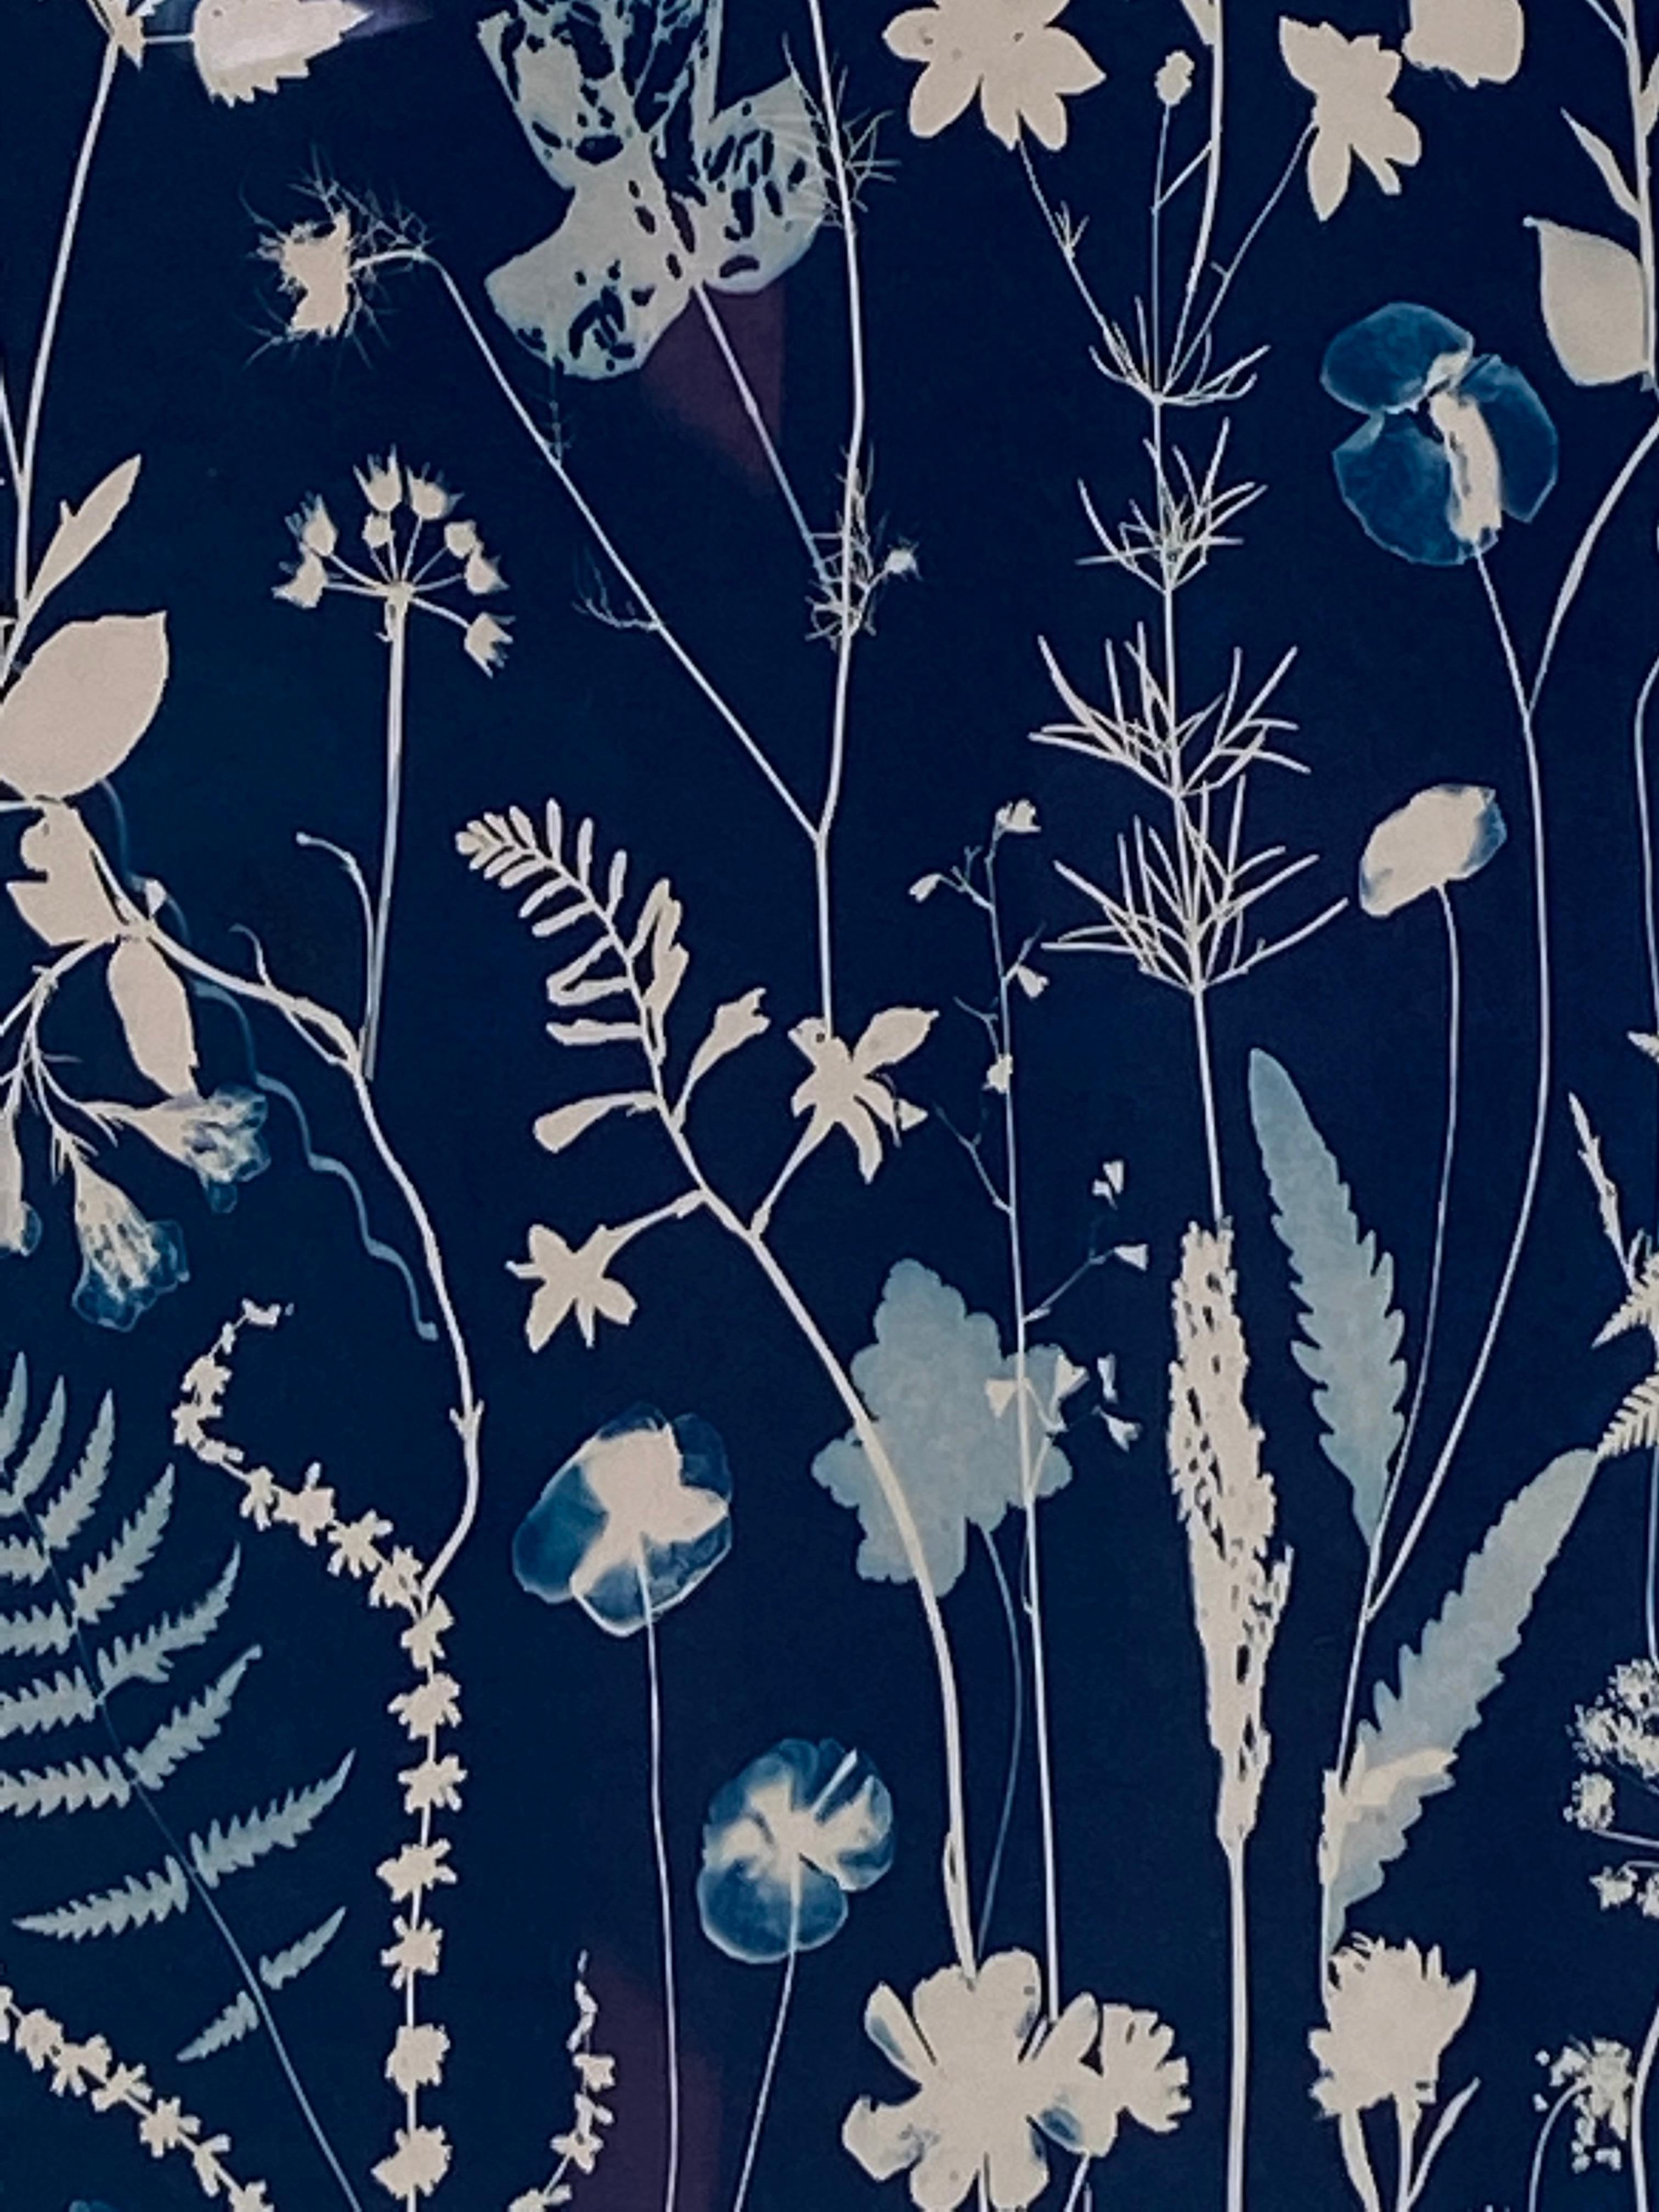 Cyanotype Painting Poppies, Rose of Sharon, Ferns, Botanical Painting in Blue - Contemporary Art by Julia Whitney Barnes